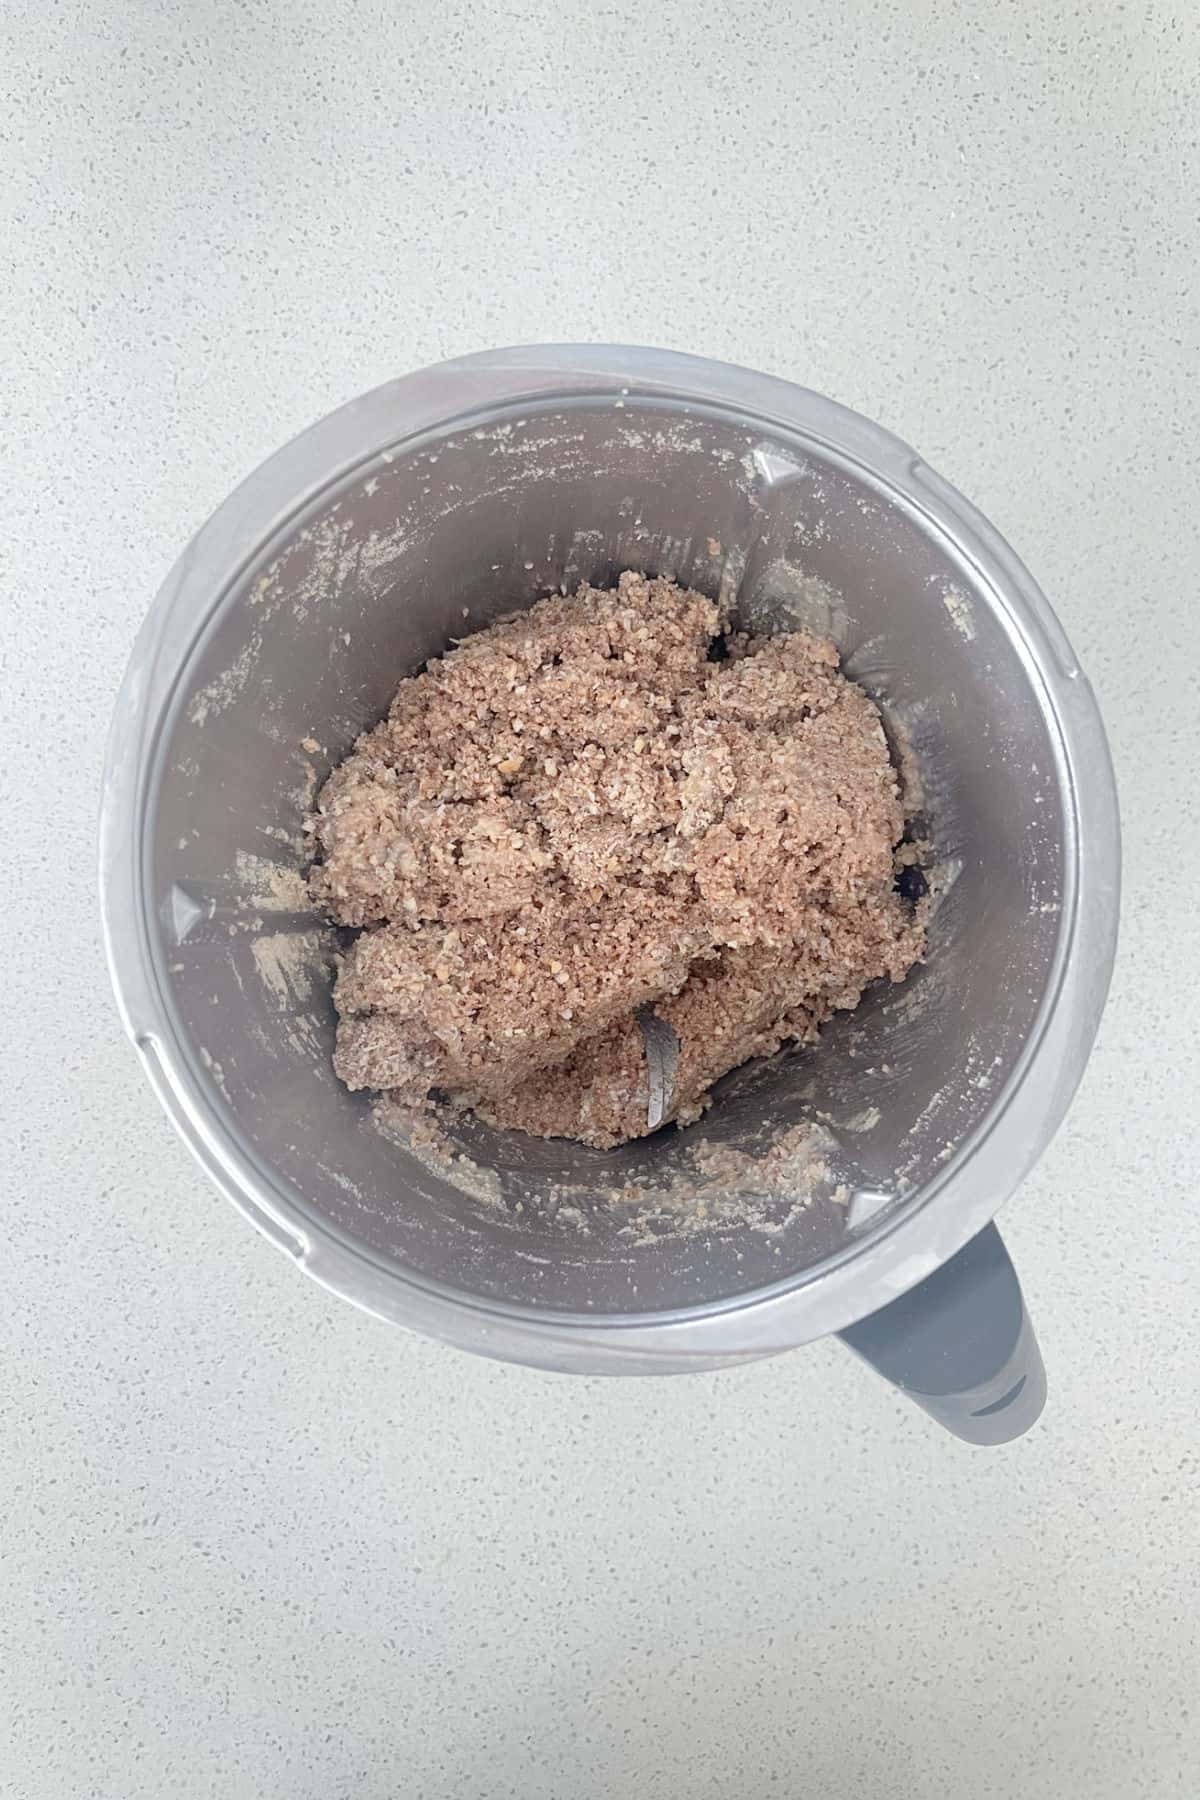 Milo Ball ingredients combined in a thermomix bowl.